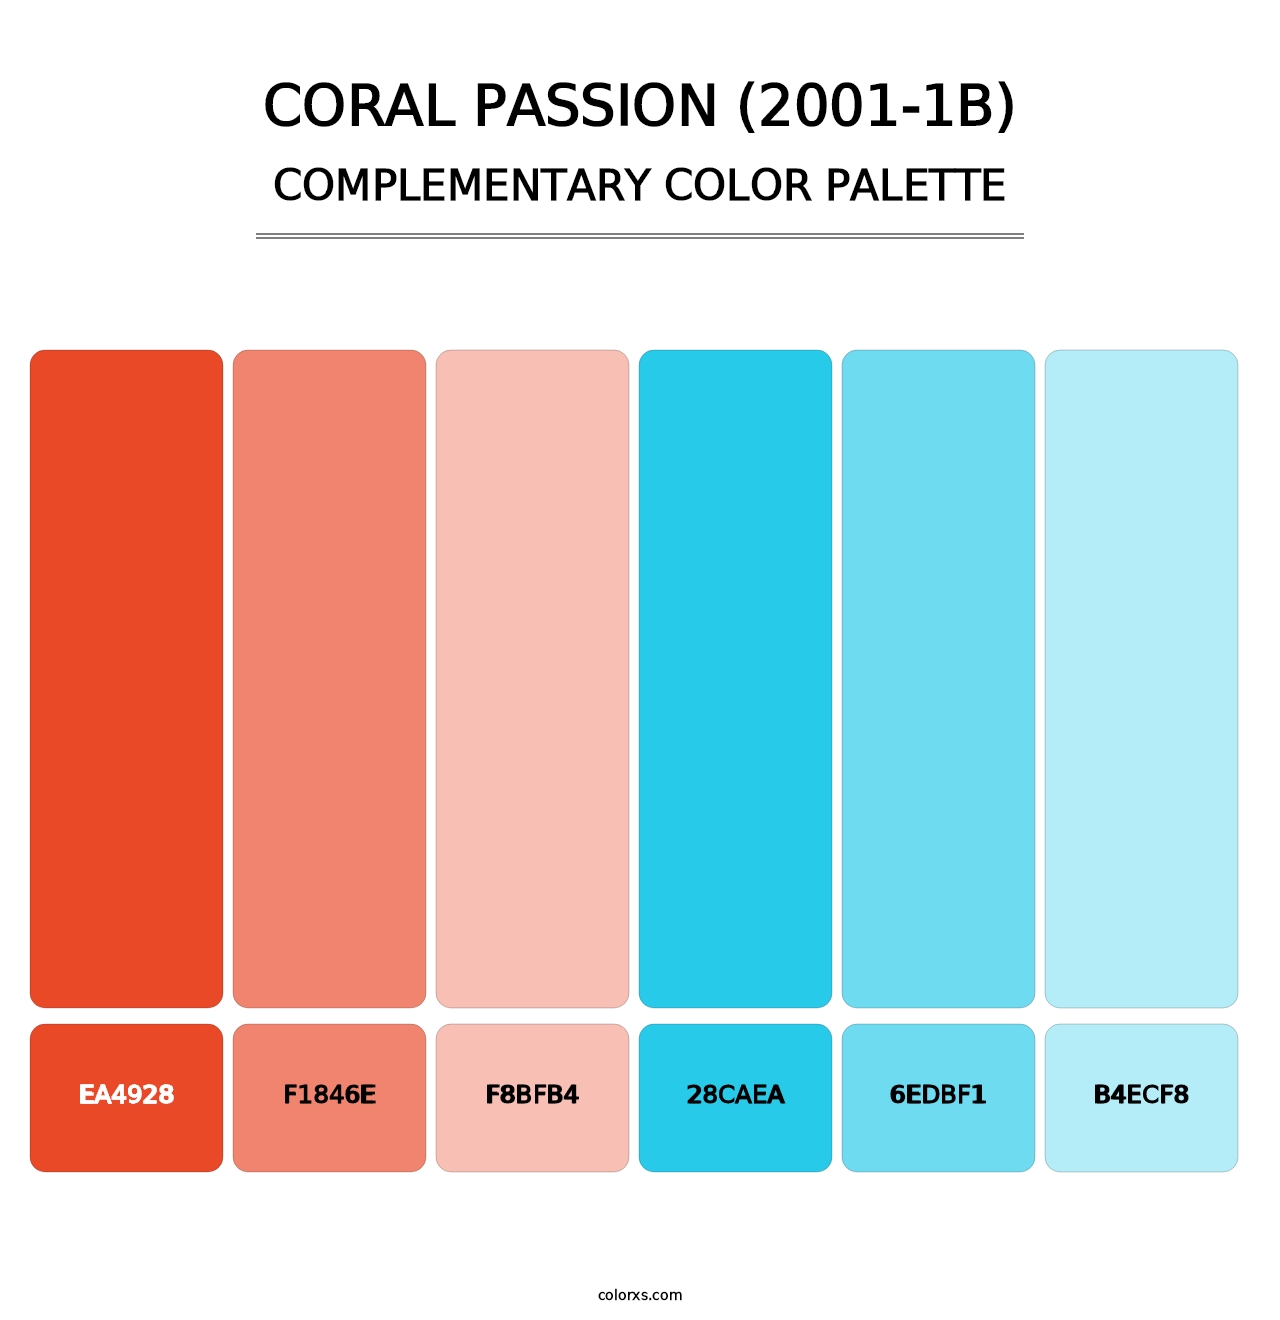 Coral Passion (2001-1B) - Complementary Color Palette